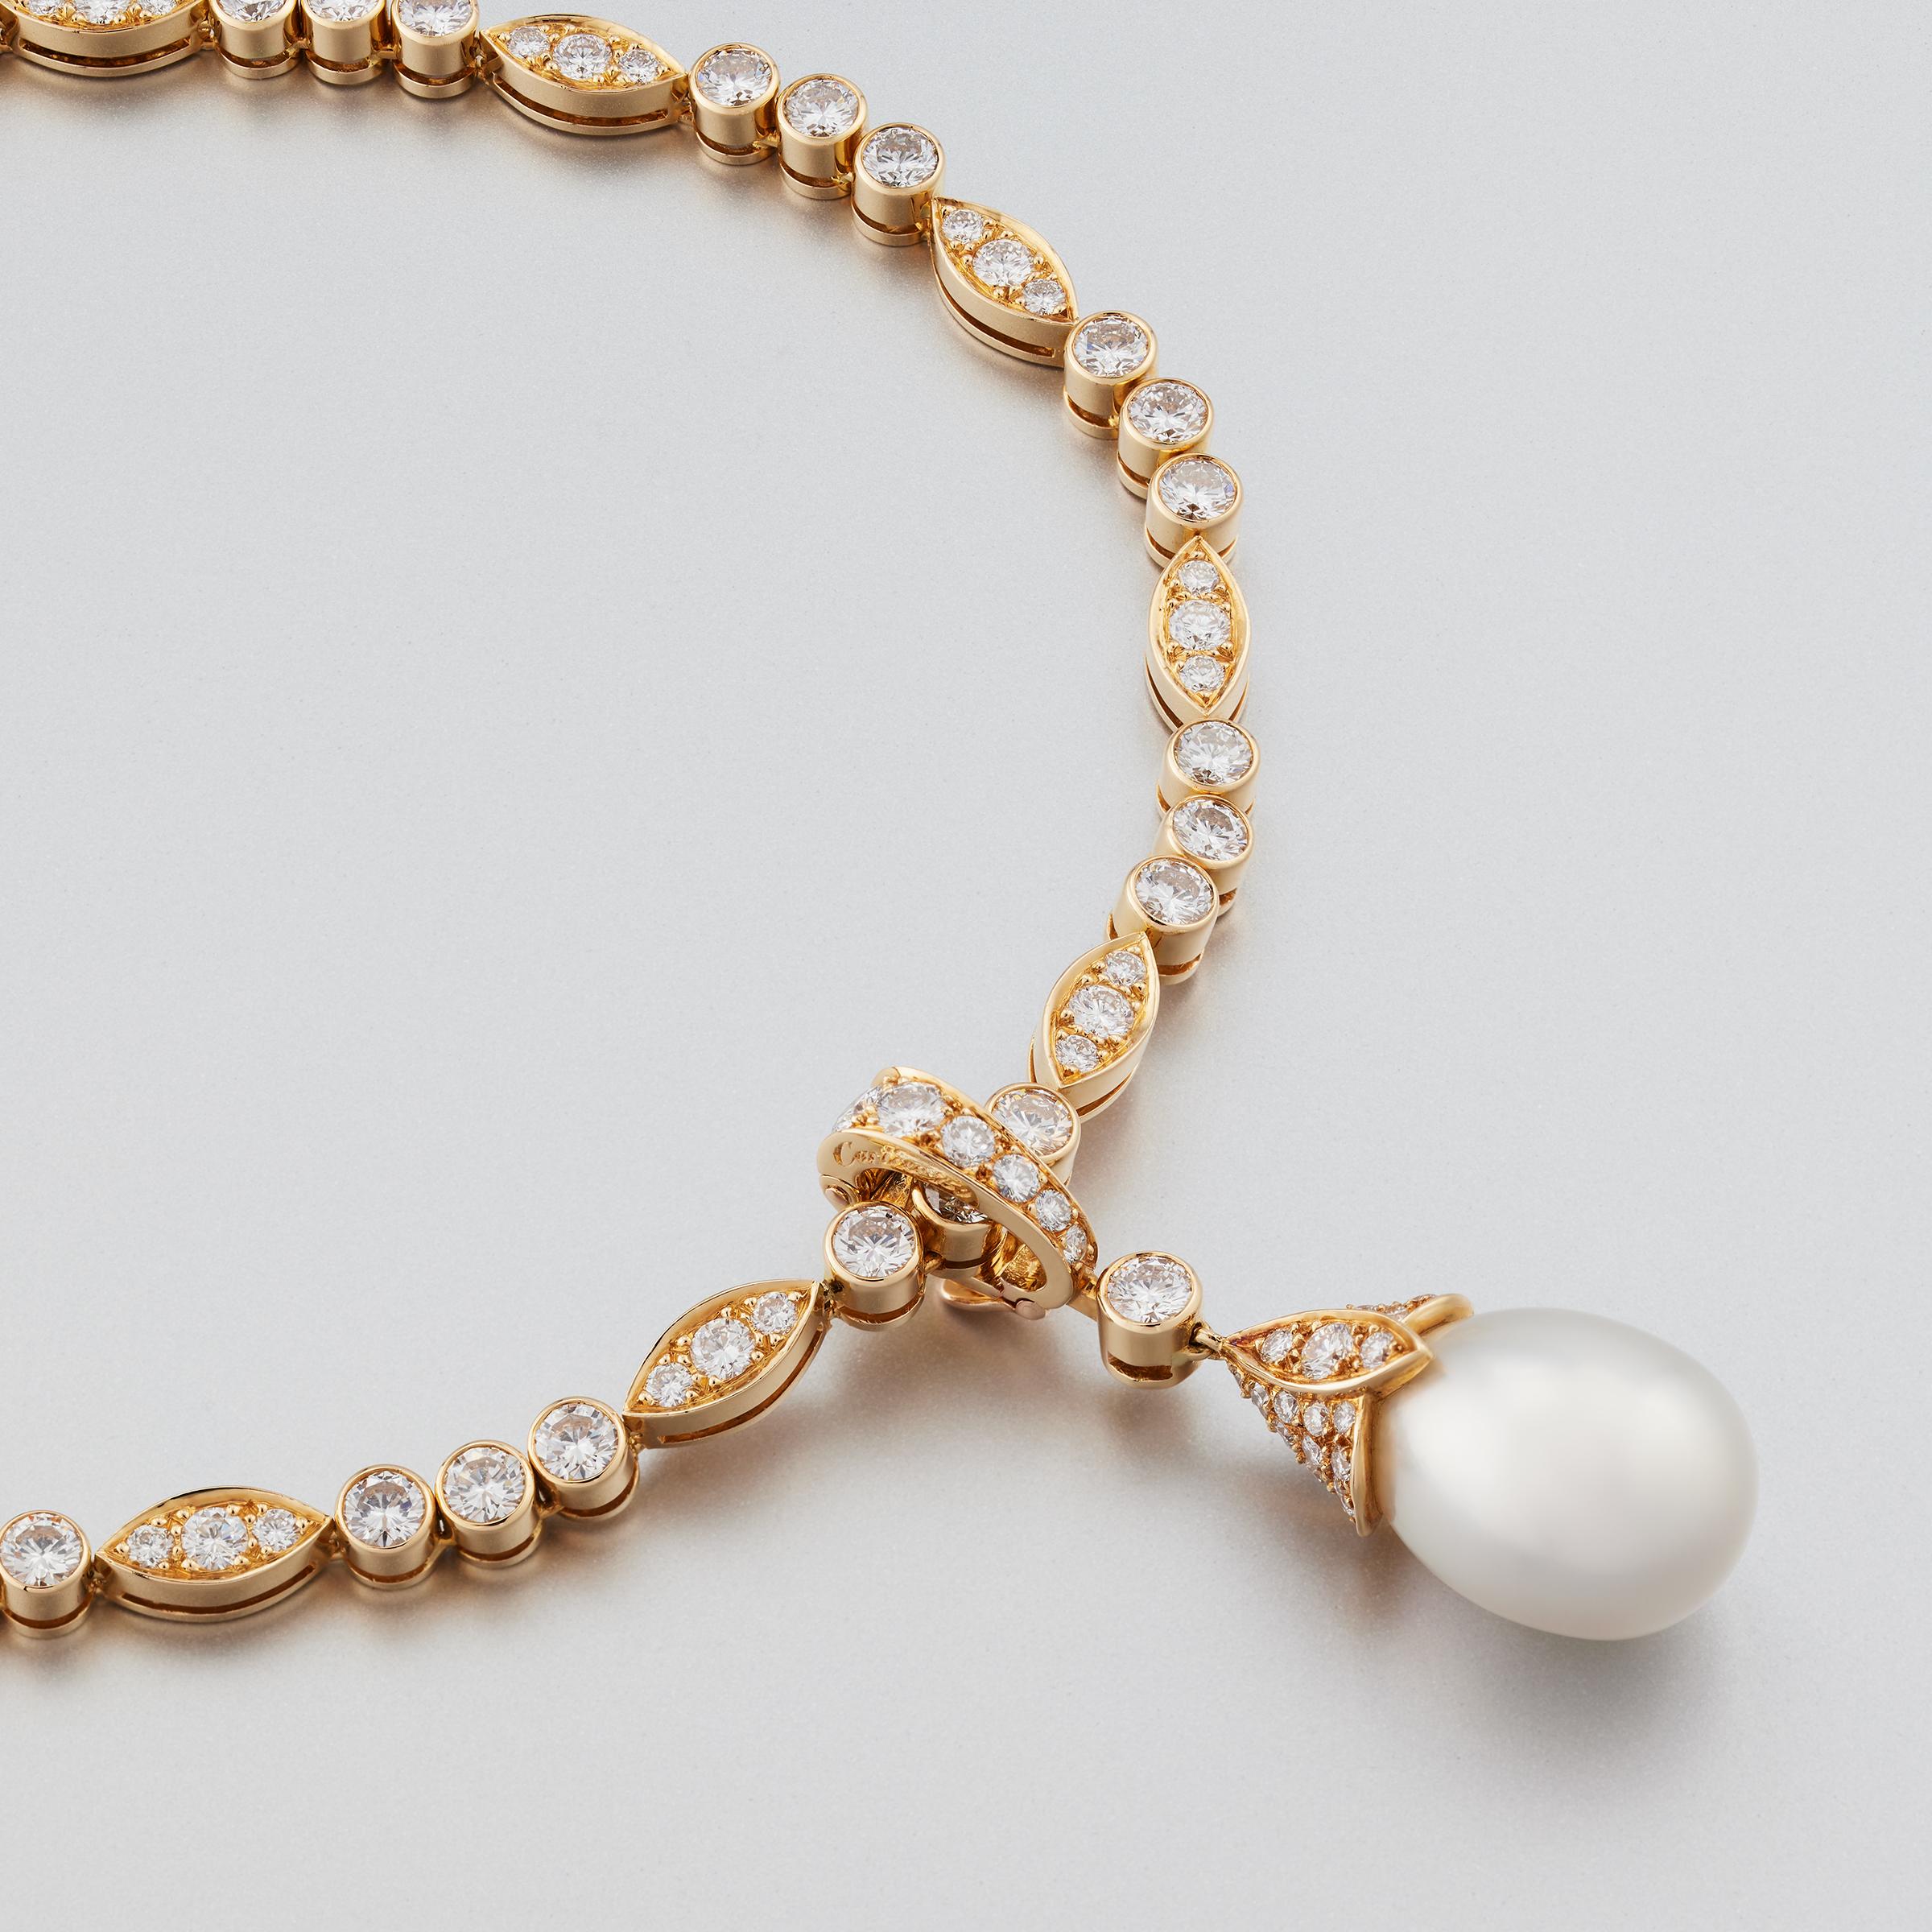 Exceptional Cartier Paris diamond line necklace featuring a detachable large pearl drop and diamond pendant. The necklace and pendant boast approximately 12 carats of finest quality diamonds (E-F color and VVS clarity) set in lavish 18 karat yellow